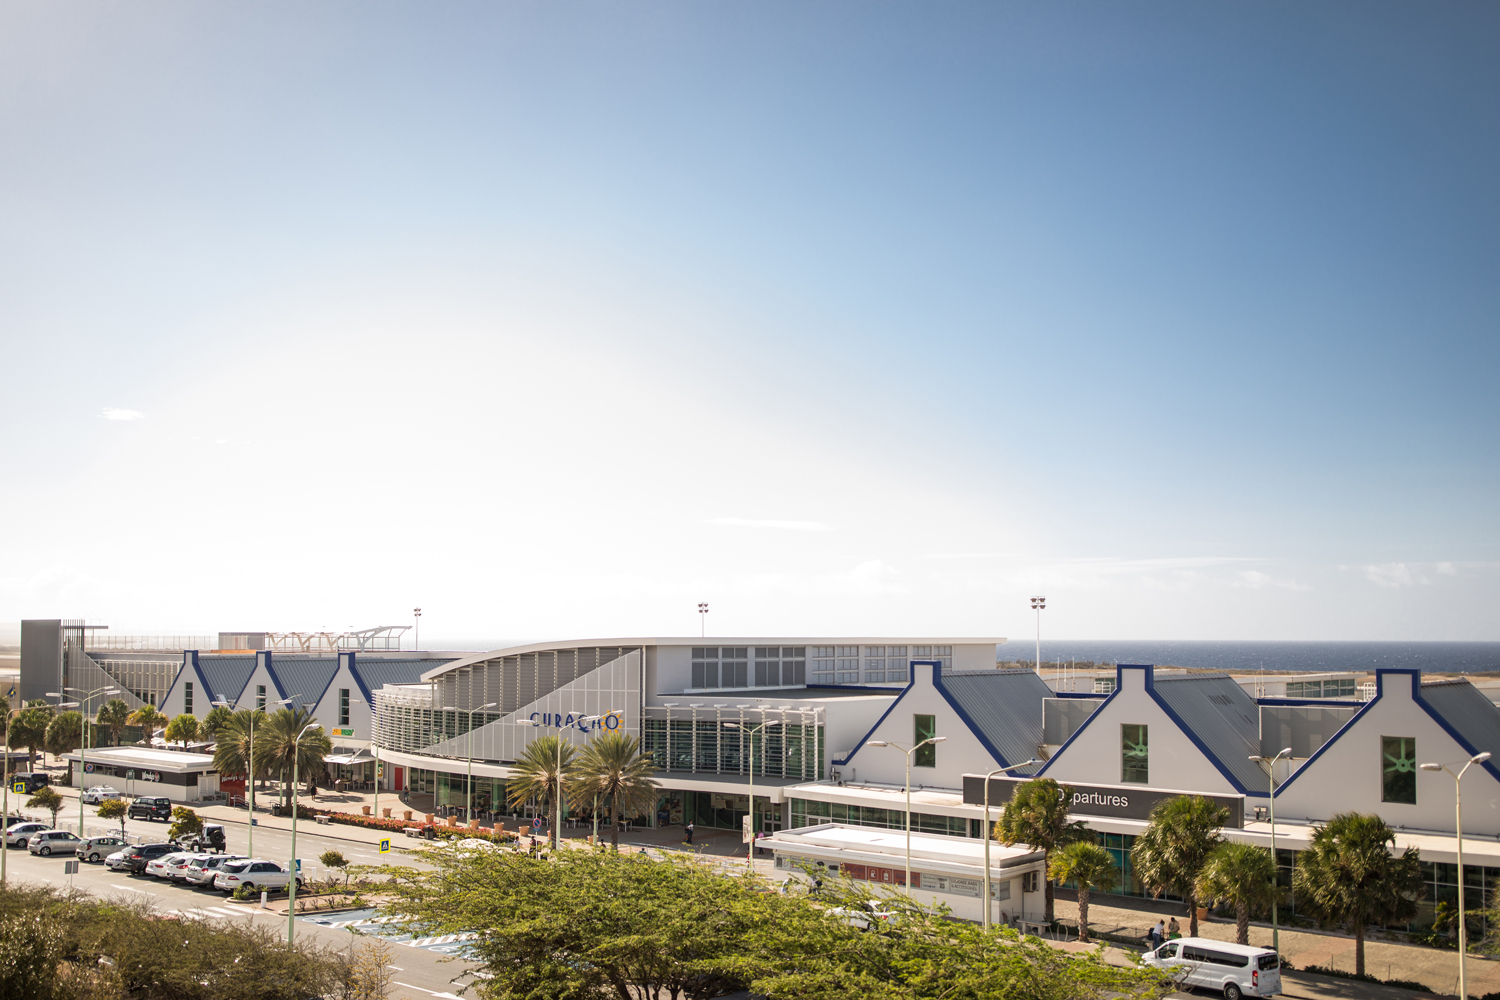 Curaçao International Airport shortlisted for Routes Americas 2023 award